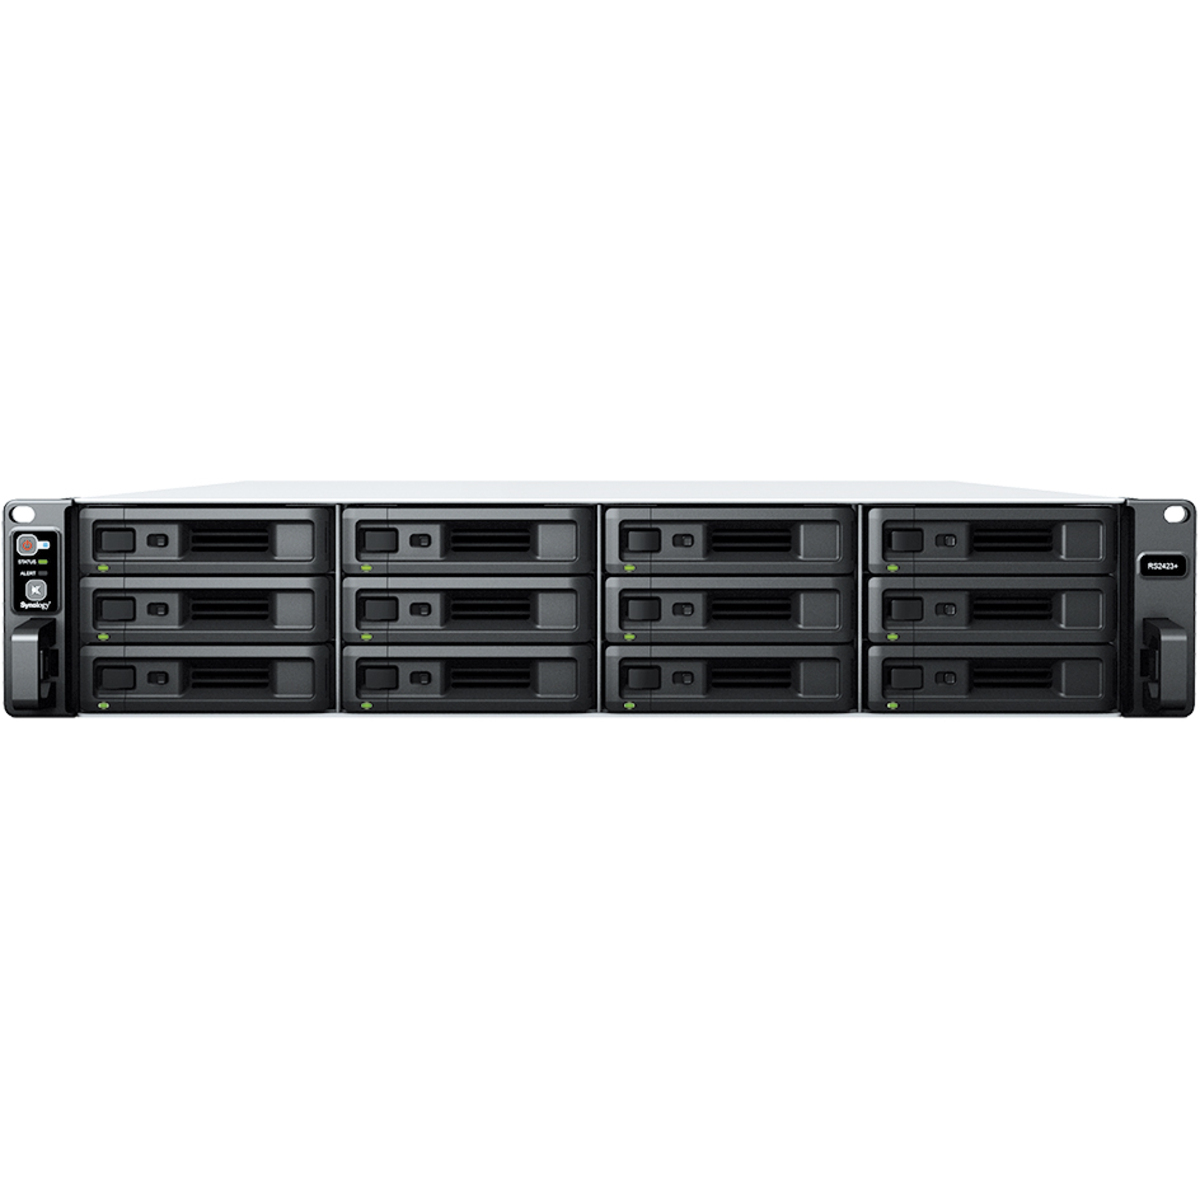 Synology RackStation RS2423+ 24tb 12-Bay RackMount Multimedia / Power User / Business NAS - Network Attached Storage Device 12x2tb Western Digital Red Plus WD20EFZX 3.5 5400rpm SATA 6Gb/s HDD NAS Class Drives Installed - Burn-In Tested RackStation RS2423+